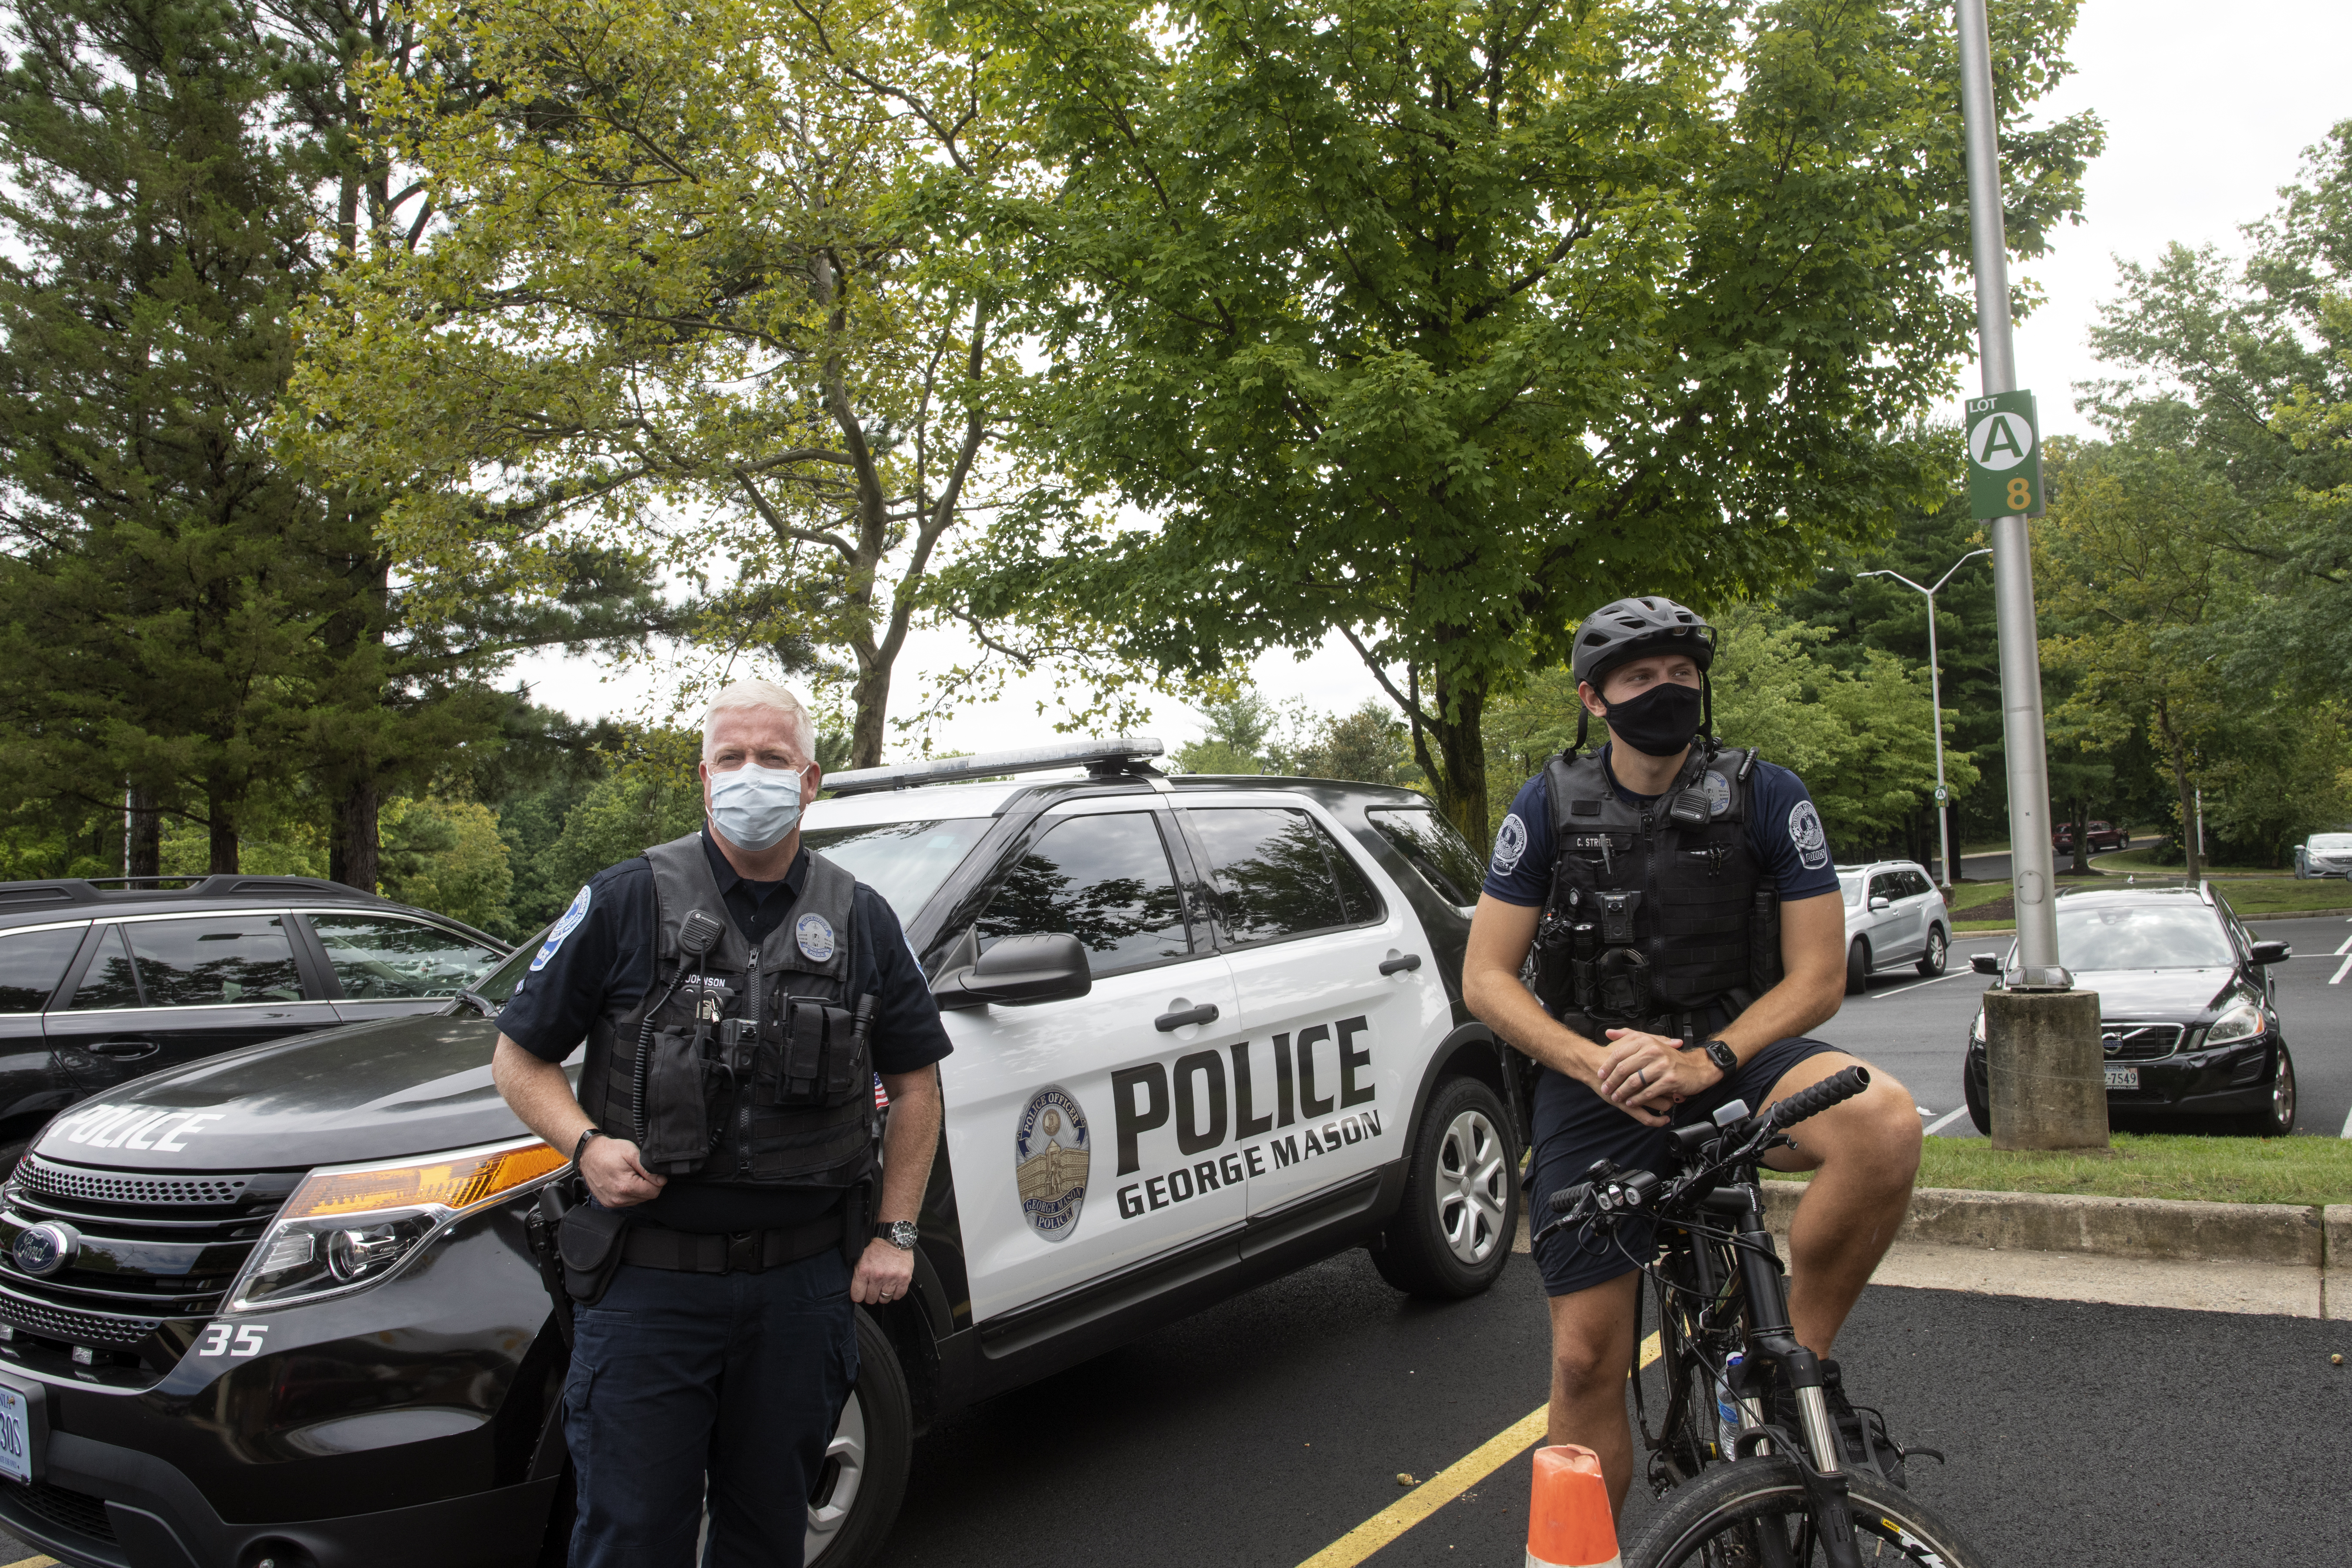 Mason police officers, one in front of patrol car, on one bicycle